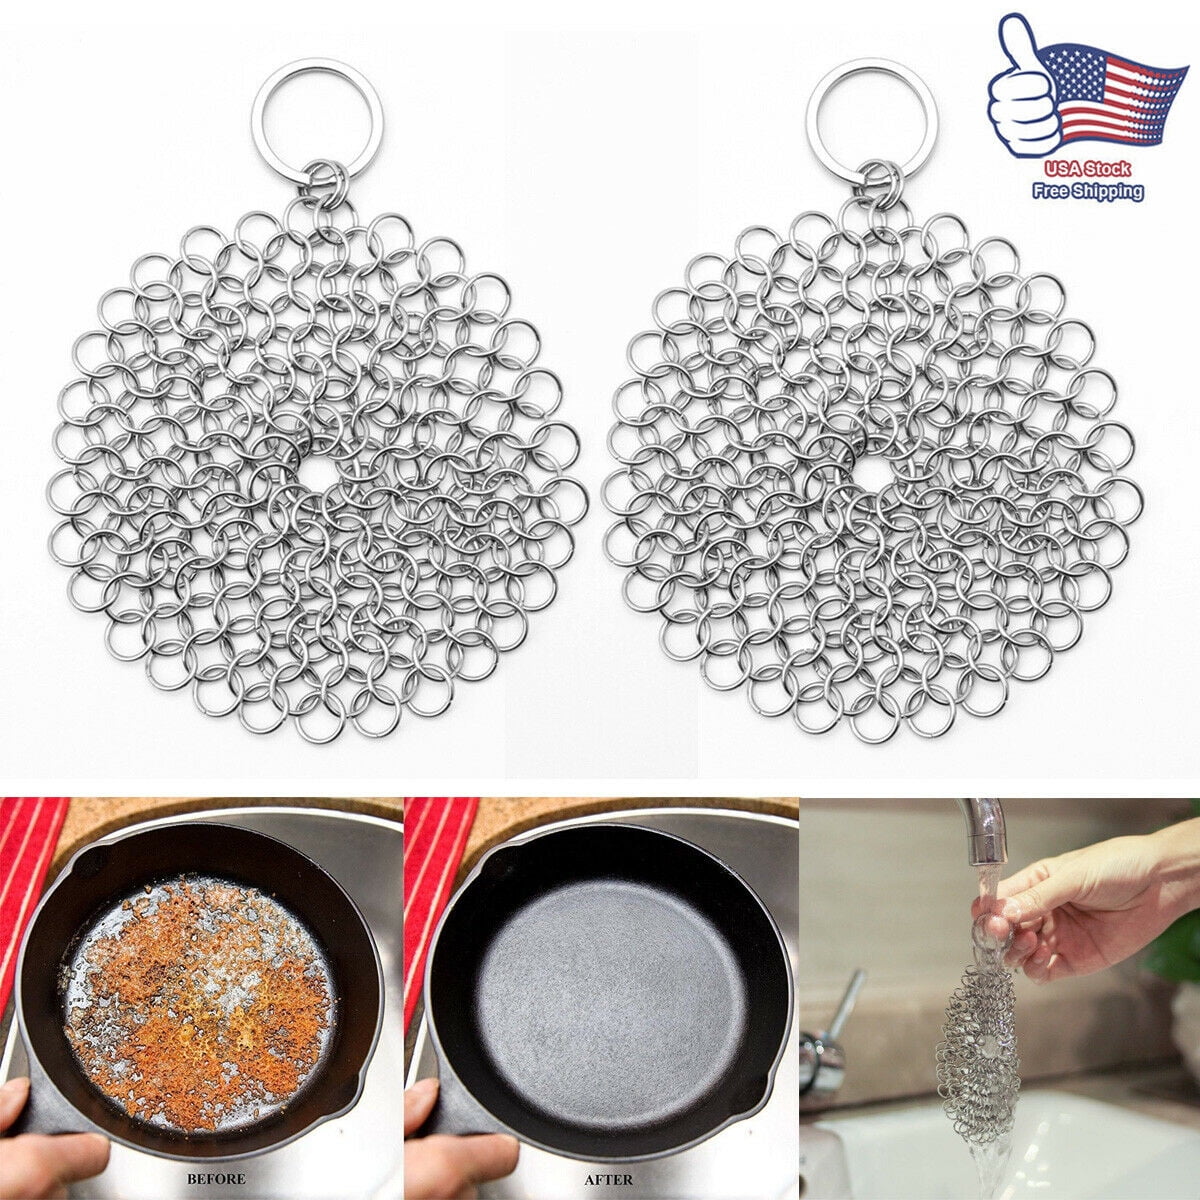  Cast Iron Cleaner Stainless Steel Chainmail Scrubber for Lodge  Cast Iron Skillet Griddle Grill Pan Cookware Pot (10x10cm/4x4inch,Silver) :  Health & Household